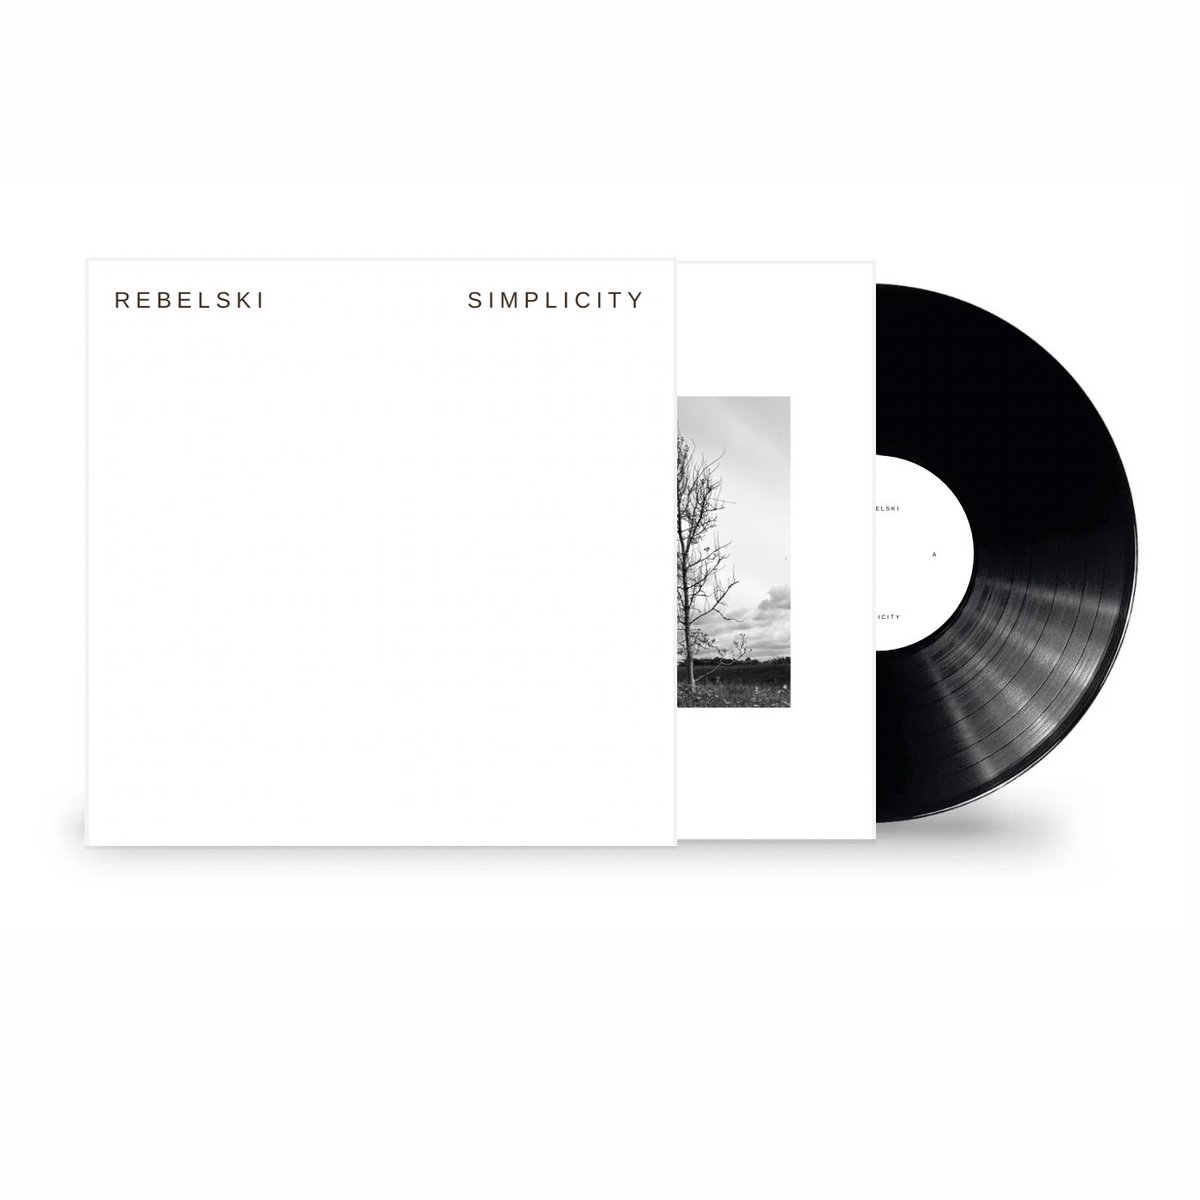 Happy album release day 🥳 ‘SIMPLICITY’ is out now on cassette and digital and available to pre-order on heavyweight 180g vinyl rebelski.bandcamp.com/album/simplici… #piano #ambientmusic #manchestermusic